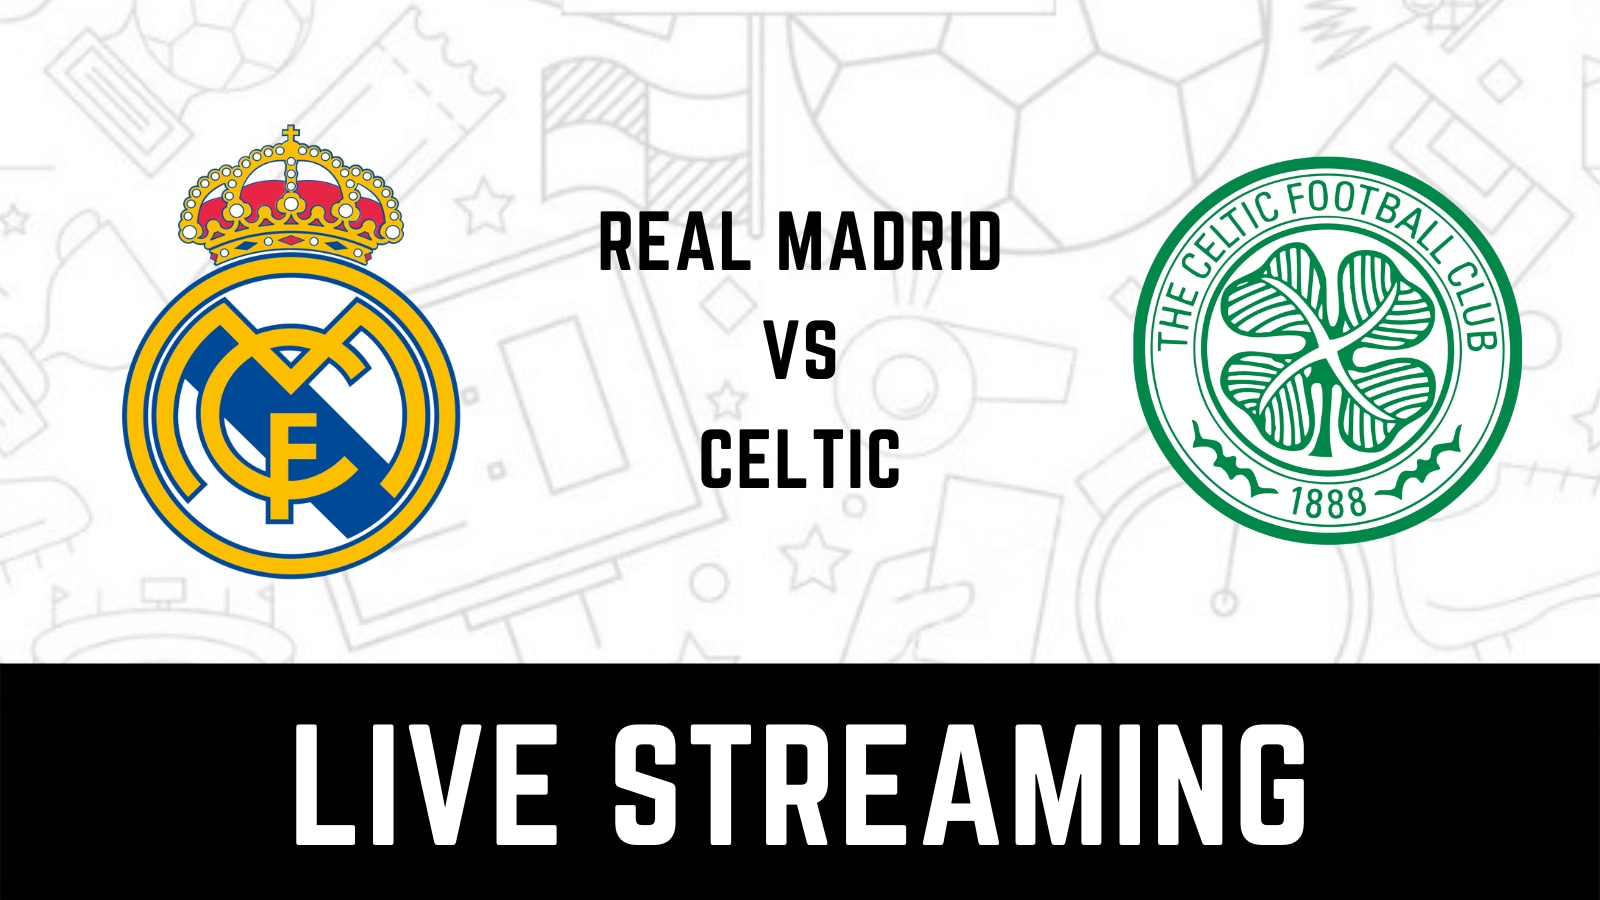 Real Madrid vs Celtic UEFA Champions League Live Streaming When and Where to Watch Real Madrid vs Celtic Match Live